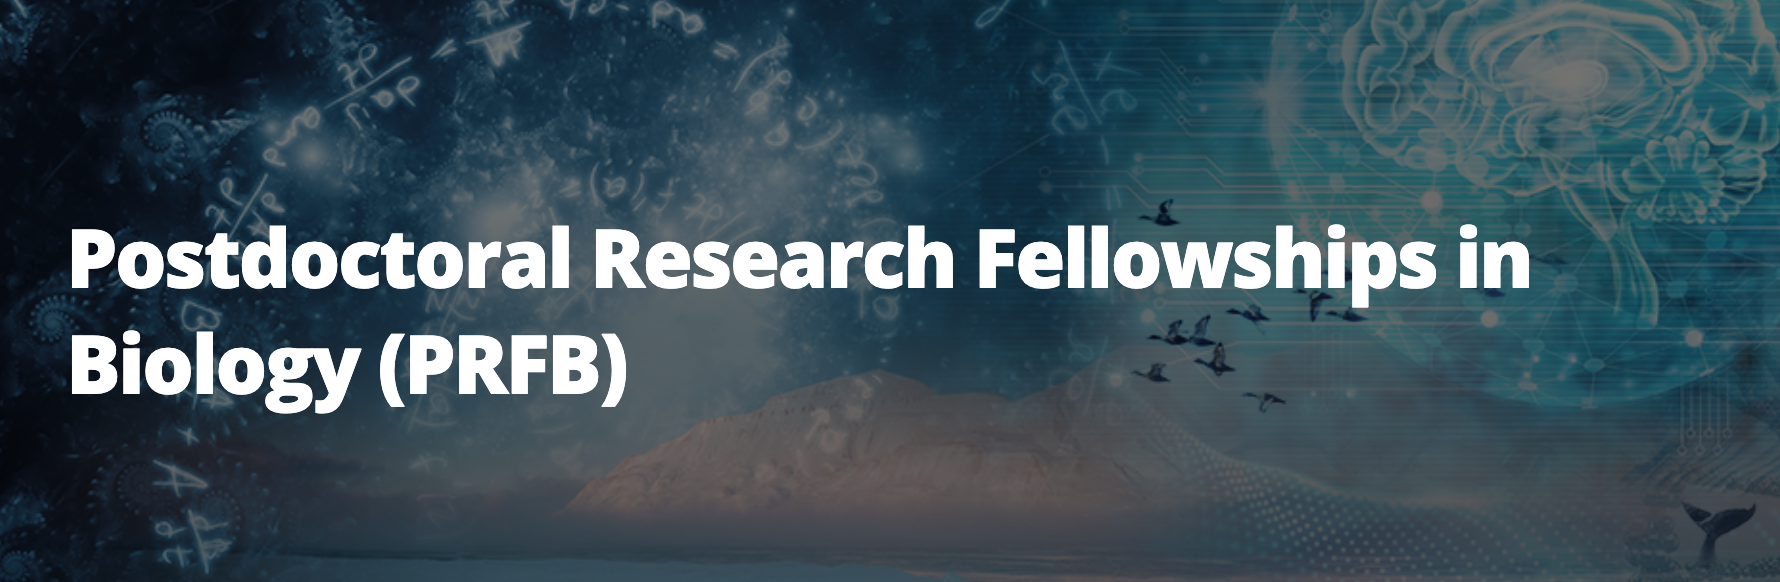 nsf postdoctoral research fellowship in biology